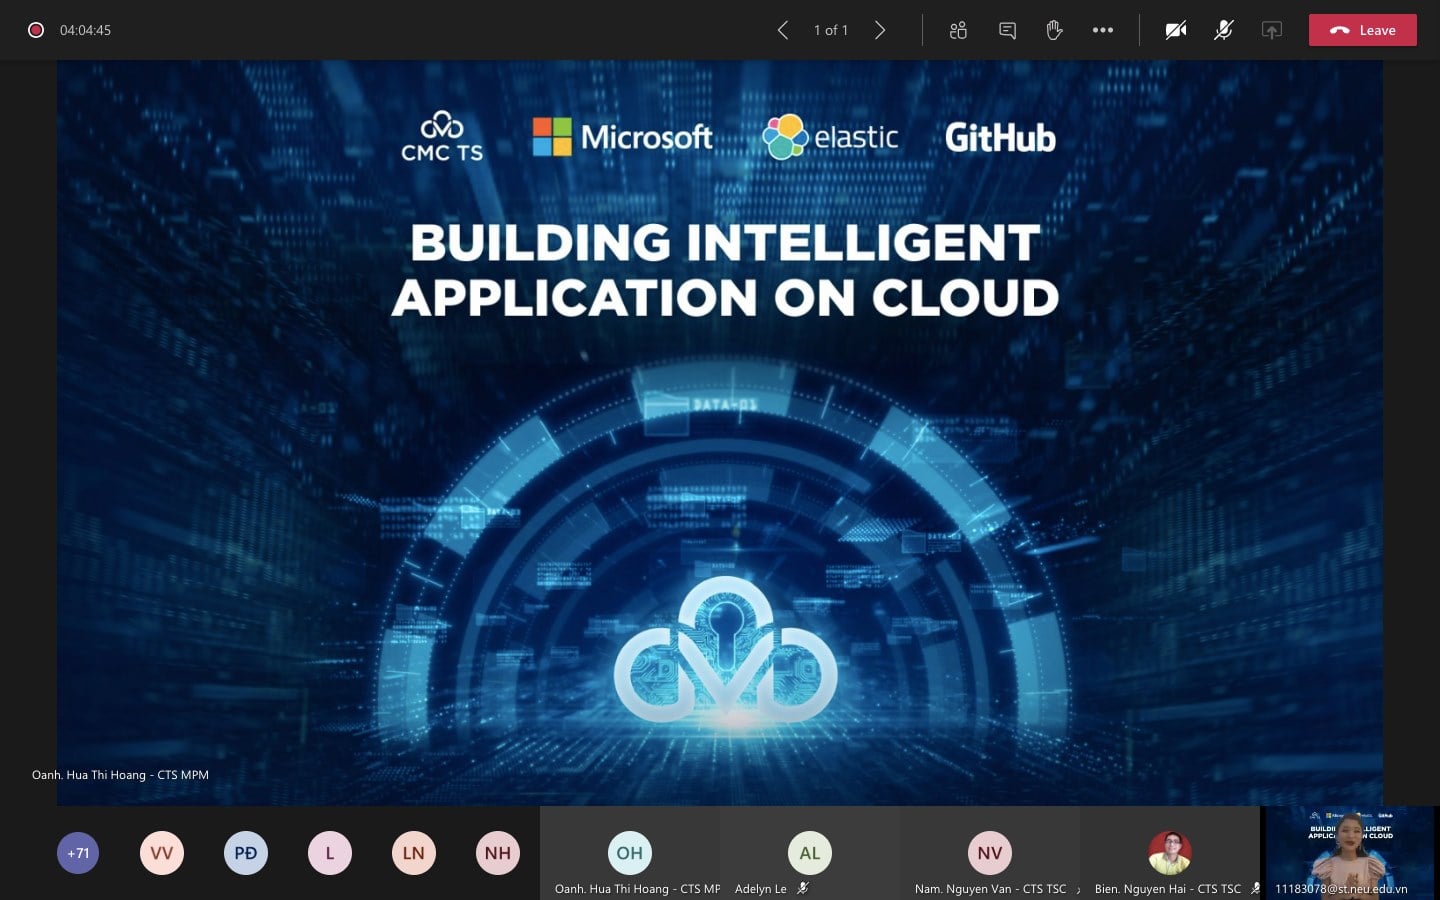 Building intelligent applications on cloud platform with solutions from CMC TS, Microsoft and Elastic